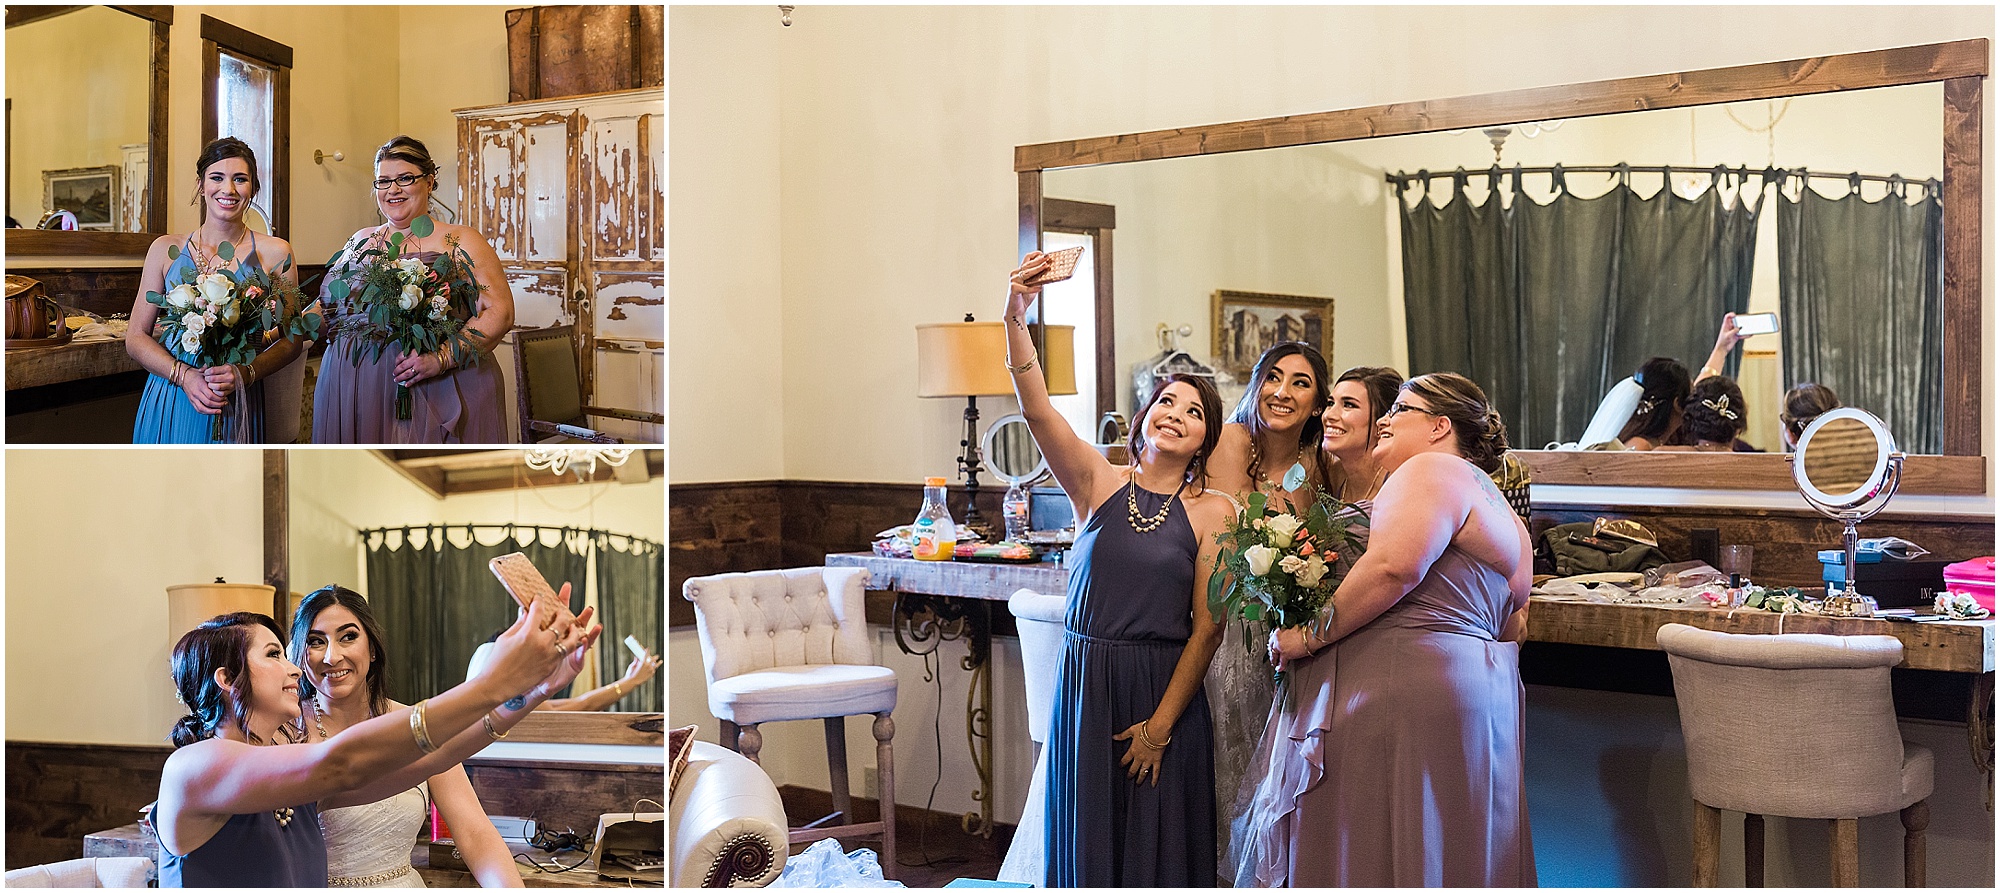 The bride and bridesmaid pose for a group selfie in the Tuscan Stables Ranch at the Canyon Wedding venue near Bend, OR. | Erica Swantek Photography